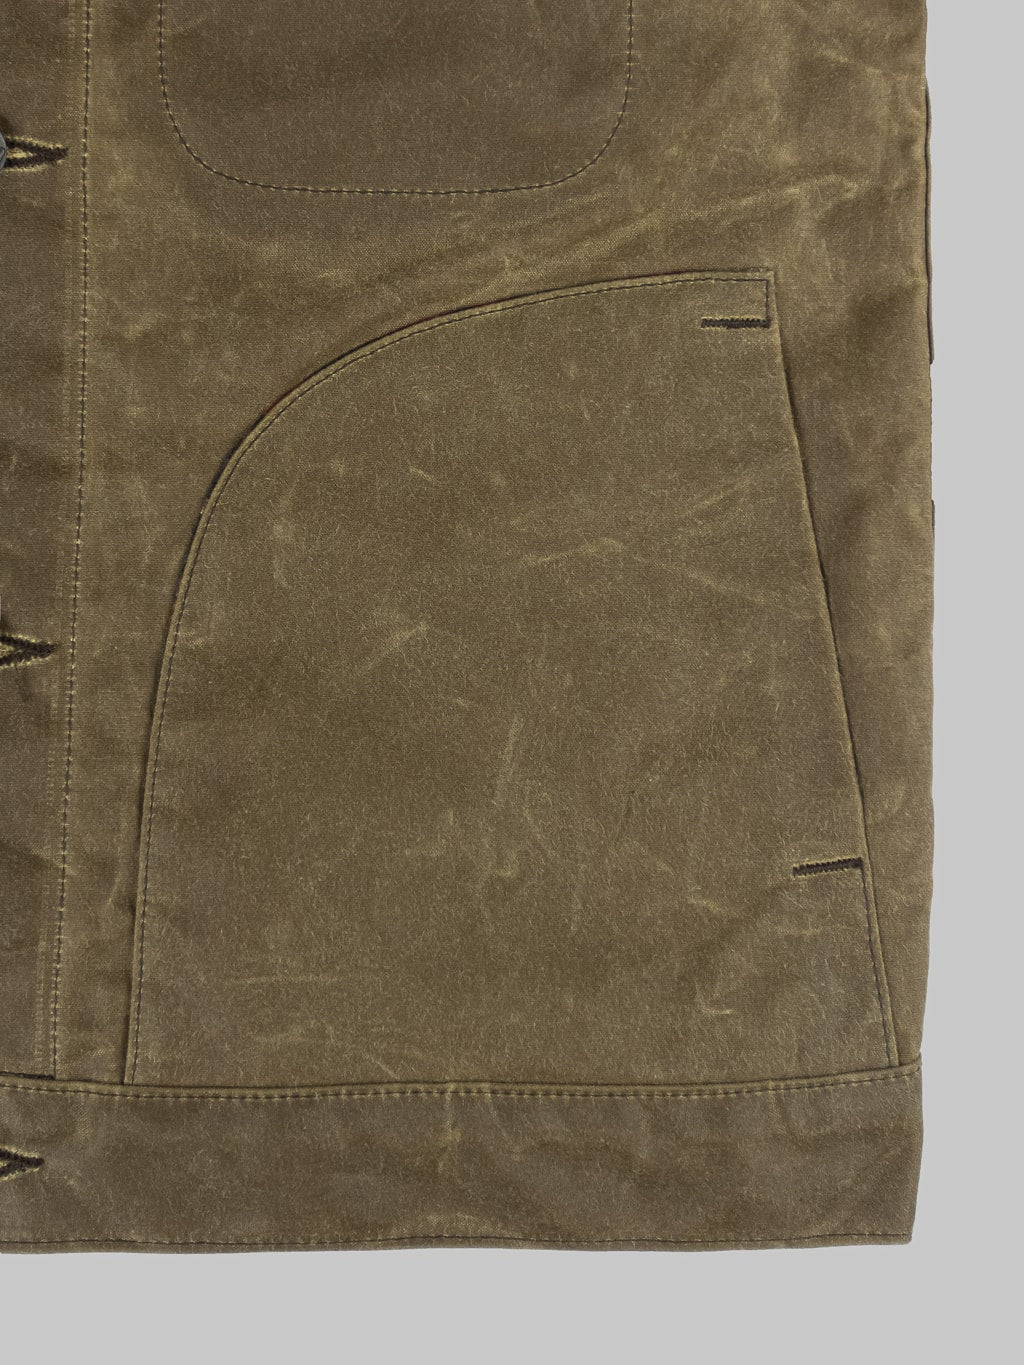 Rogue Territory Supply Jacket Lined Brown Ridgeline side pocket closeup